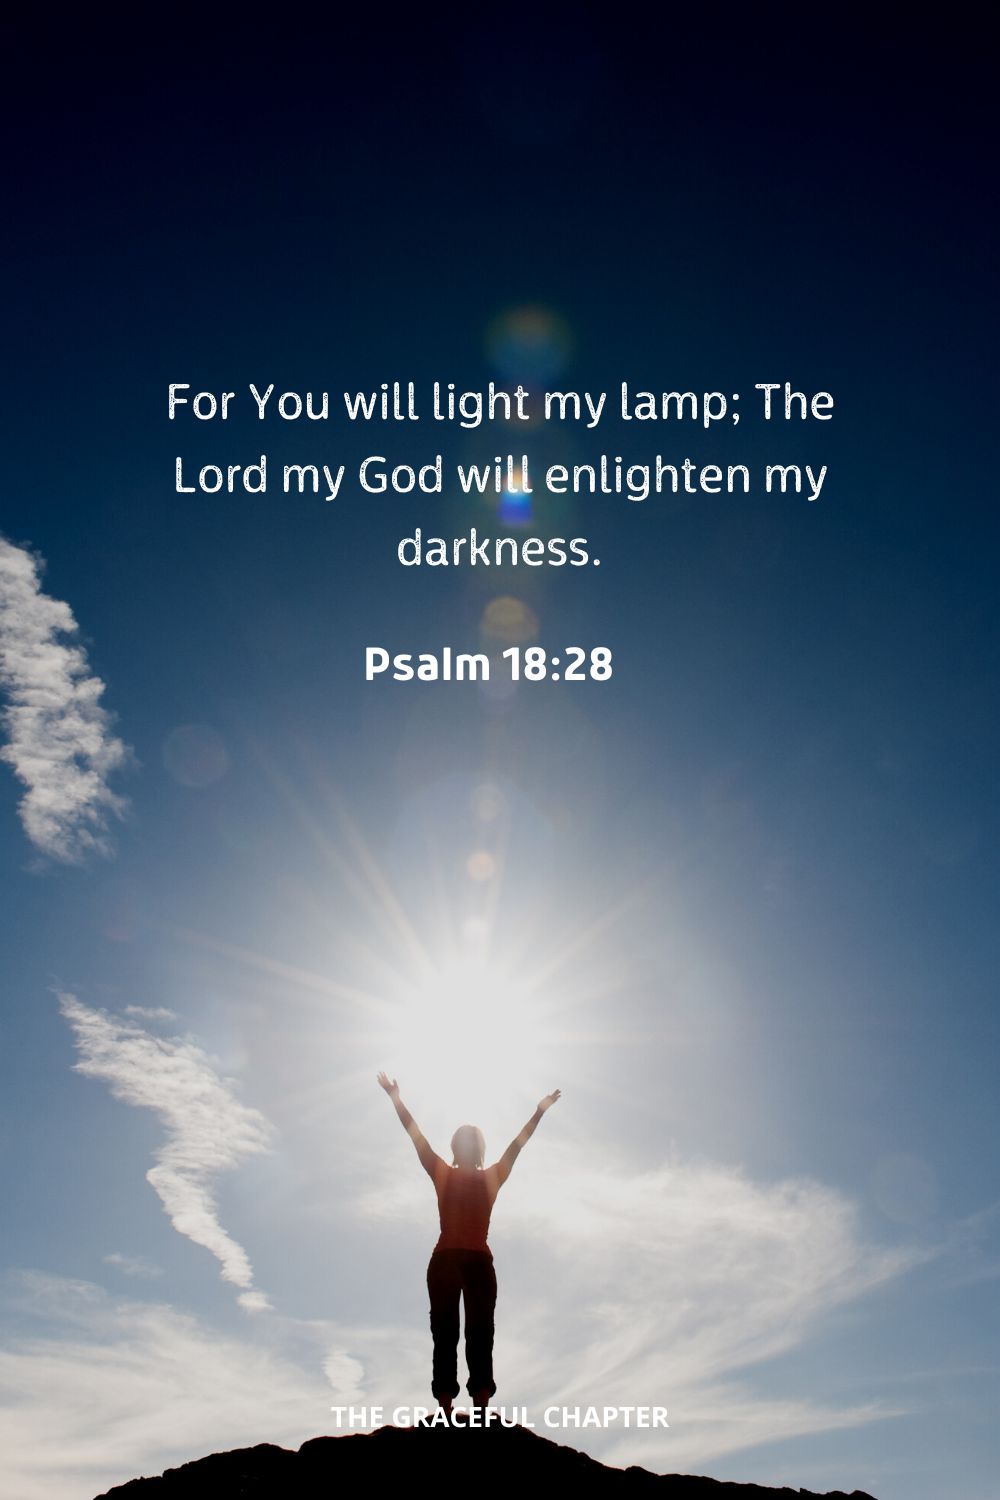 For You will light my lamp; The Lord my God will enlighten my darkness.